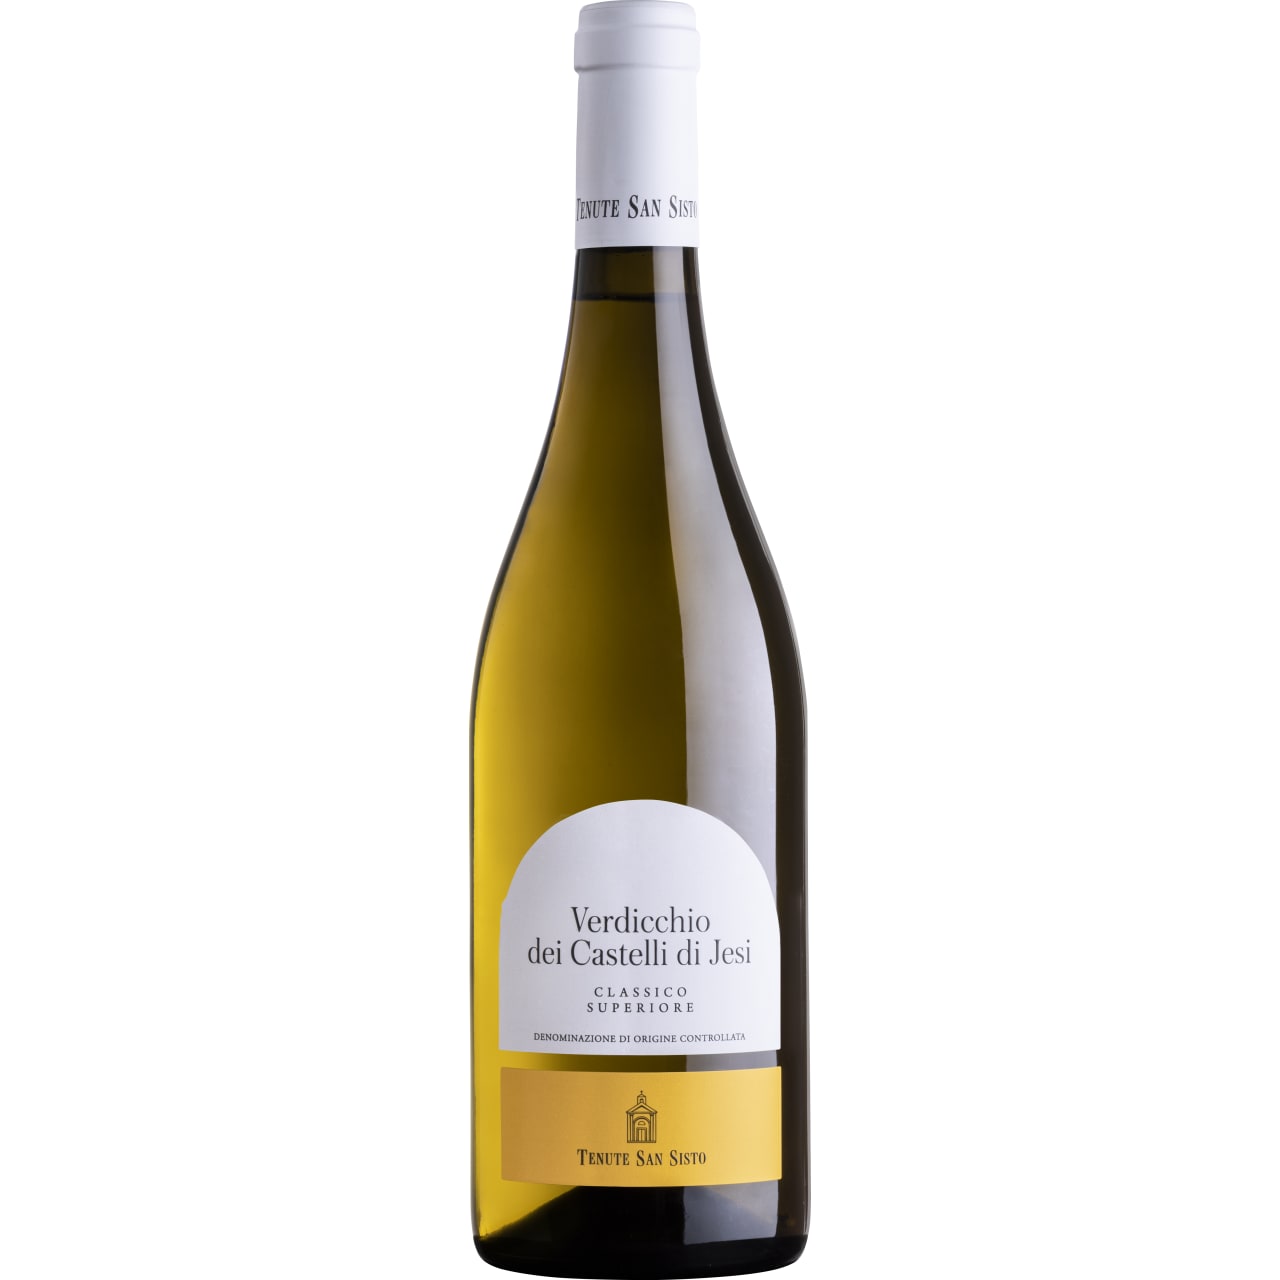 The wine has a straw-yellow colour with greenish highlights It is fresh on the nose, with hints of apple, pear, flowers and aniseed.